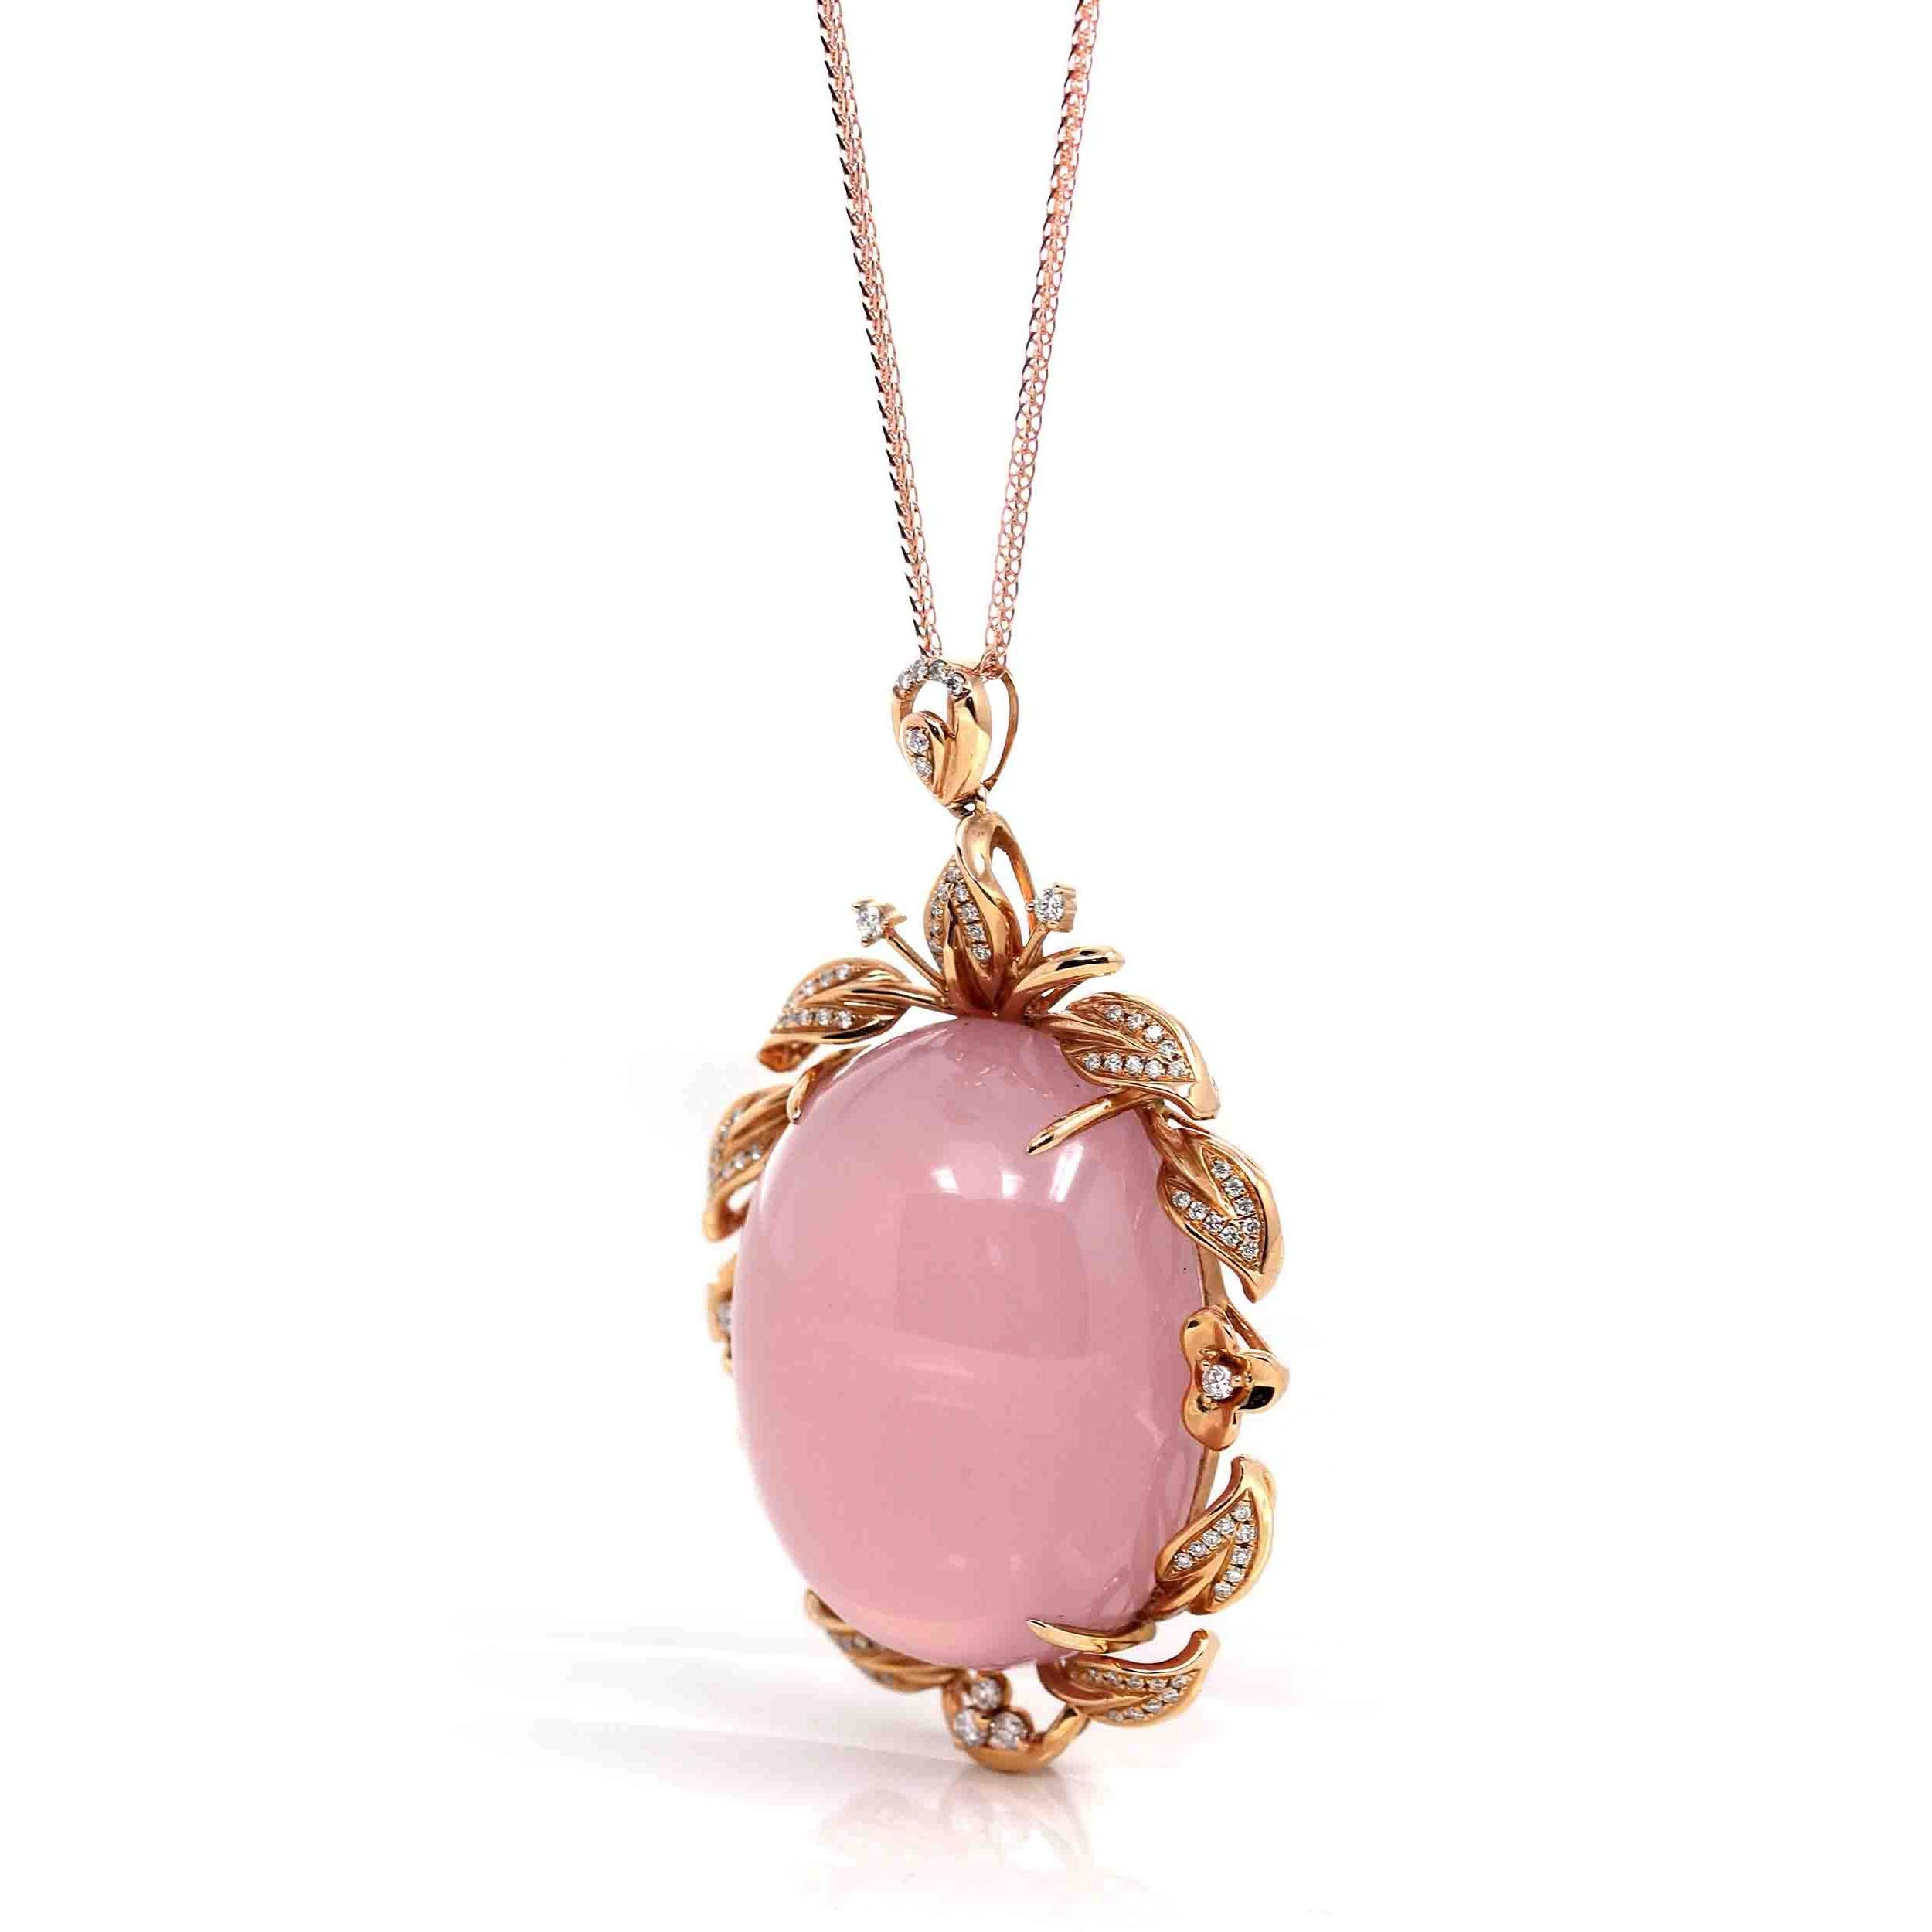 * DESIGN CONCEPT---18k Rose Gold & Natural Rose Quartz Pendant Necklace. This pendant made with high-quality genuine pink rose quartz. The rose quartz is striking yet elegant. Rose quartz represents the bananas between relationships. The design is a